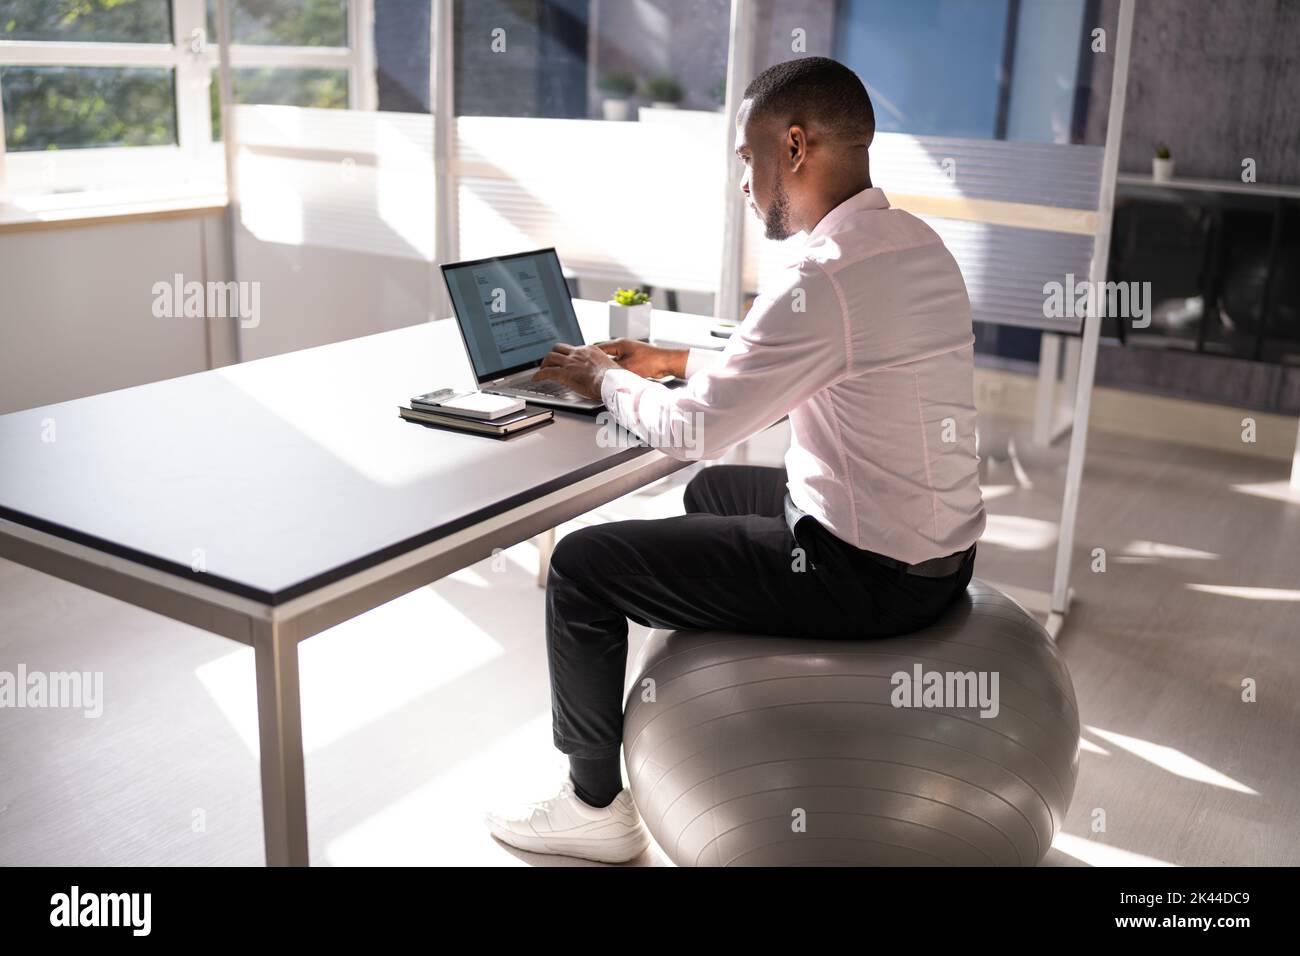 Correct Posture At Desk In Office Using Fitness Ball Stock Photo